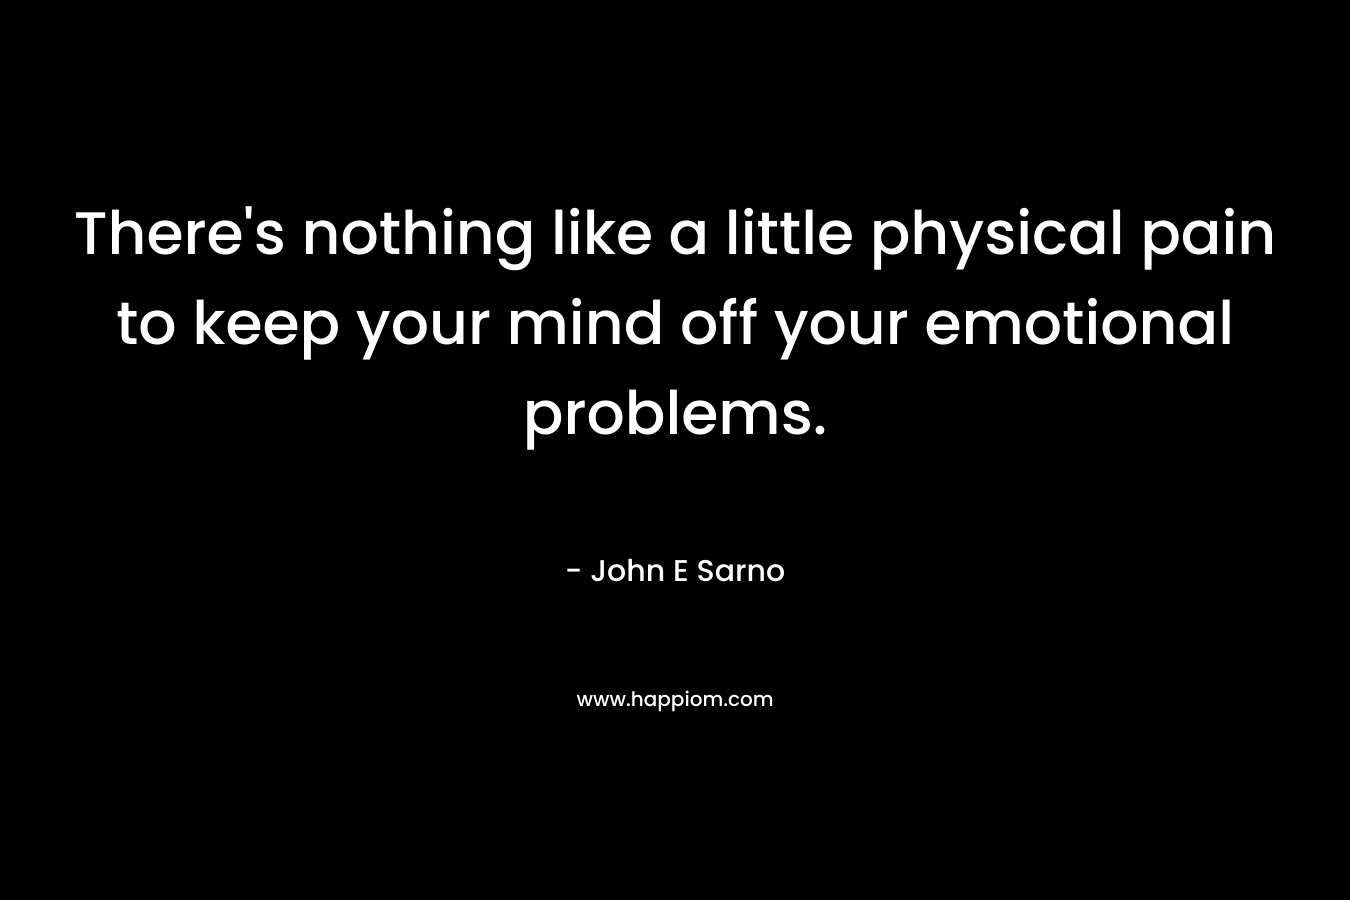 There’s nothing like a little physical pain to keep your mind off your emotional problems. – John E Sarno